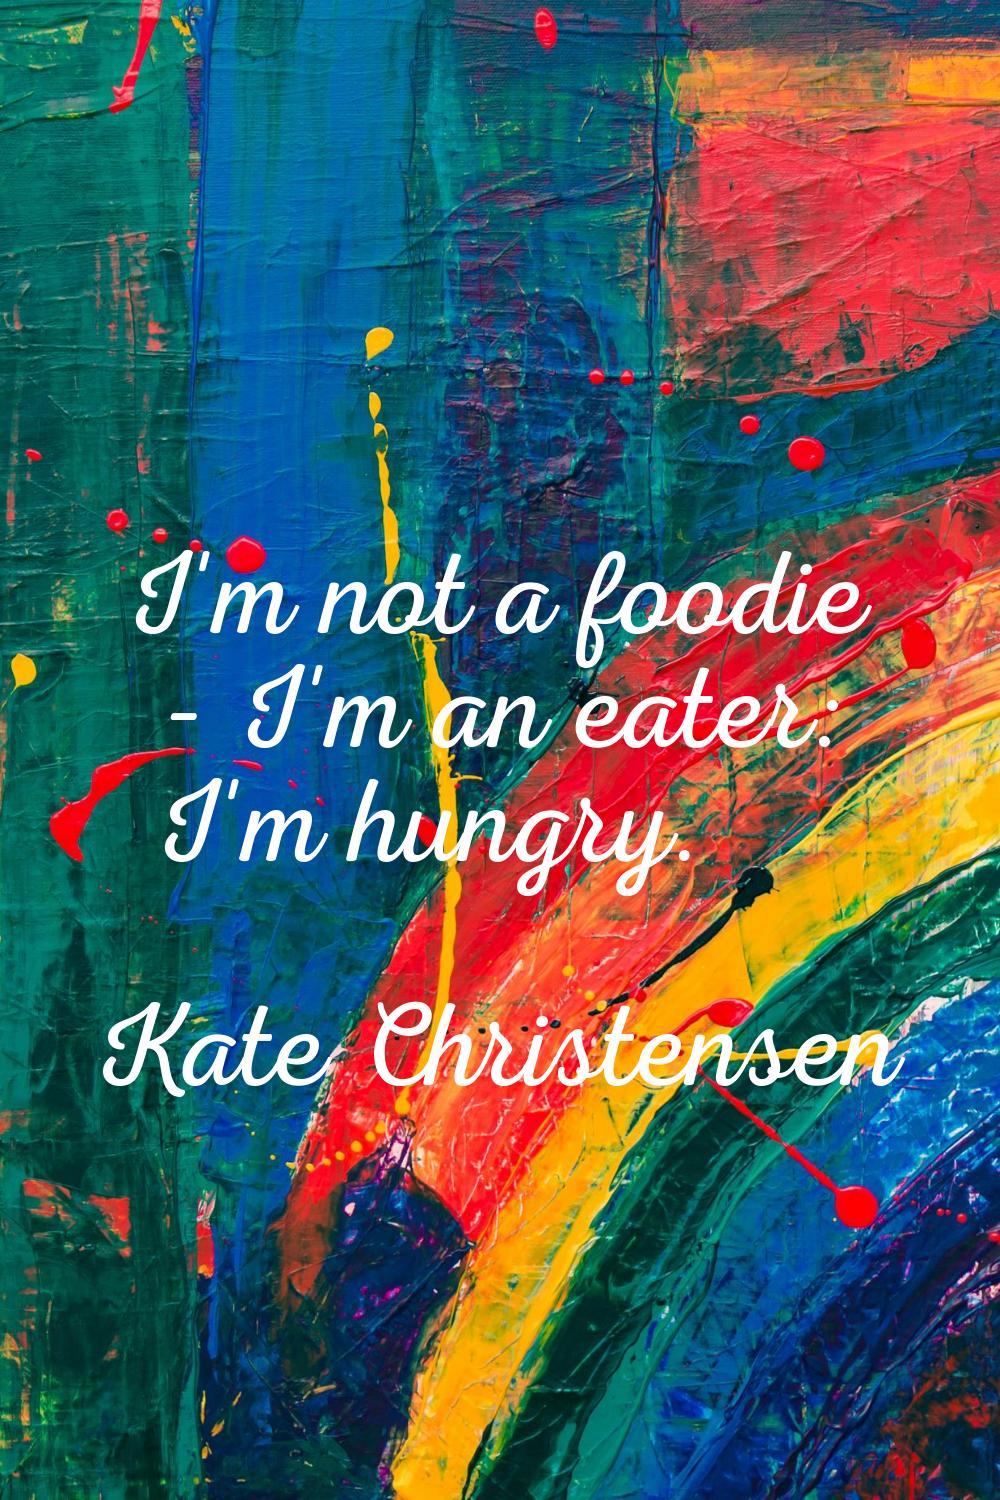 I'm not a foodie - I'm an eater: I'm hungry.